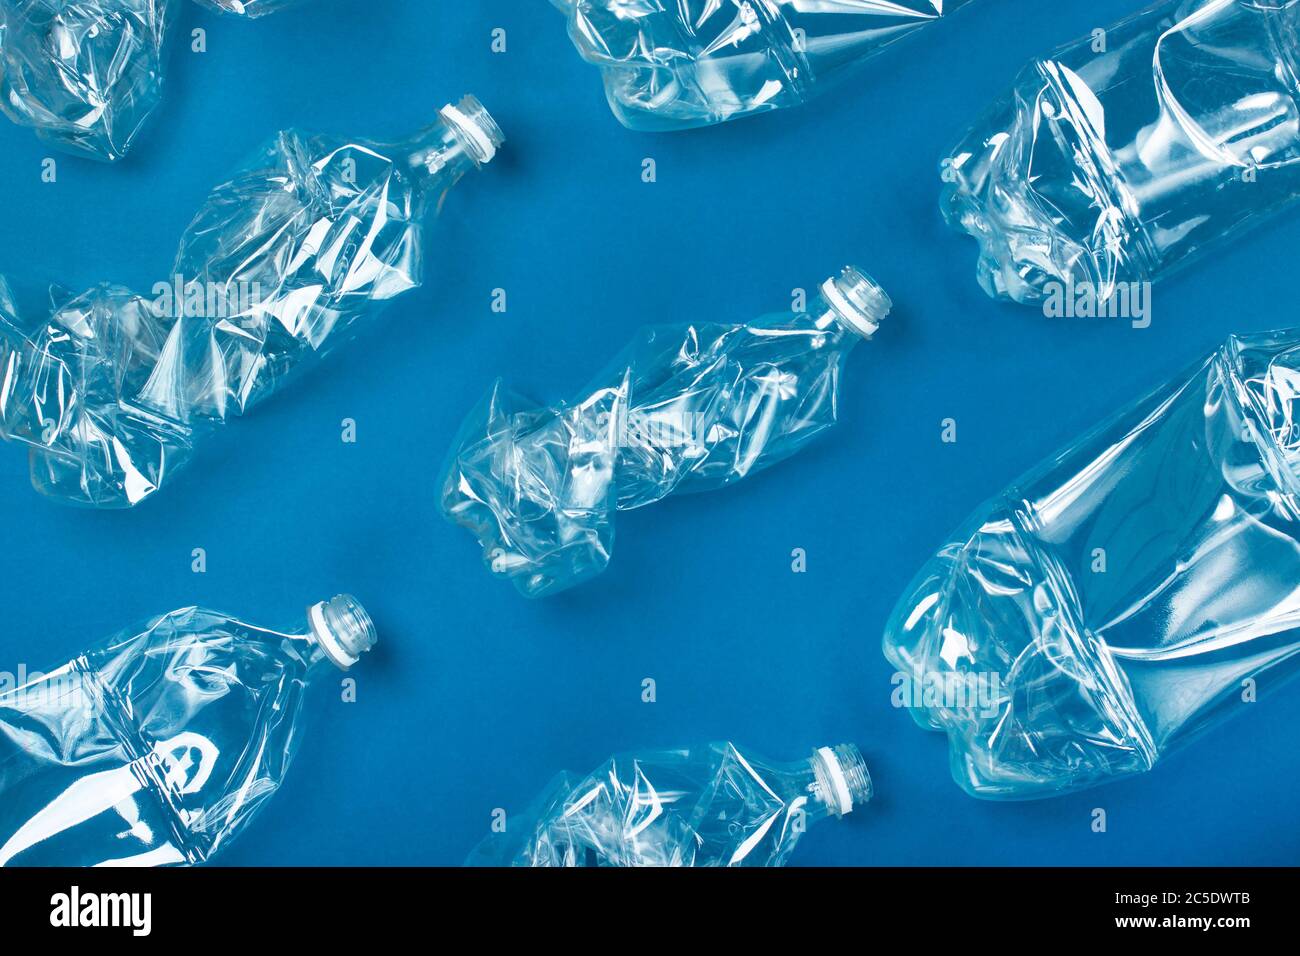 A lot of used plastic bottles on a blue background. The concept of pollution of the planet and the oceans with plastic waste. Stock Photo